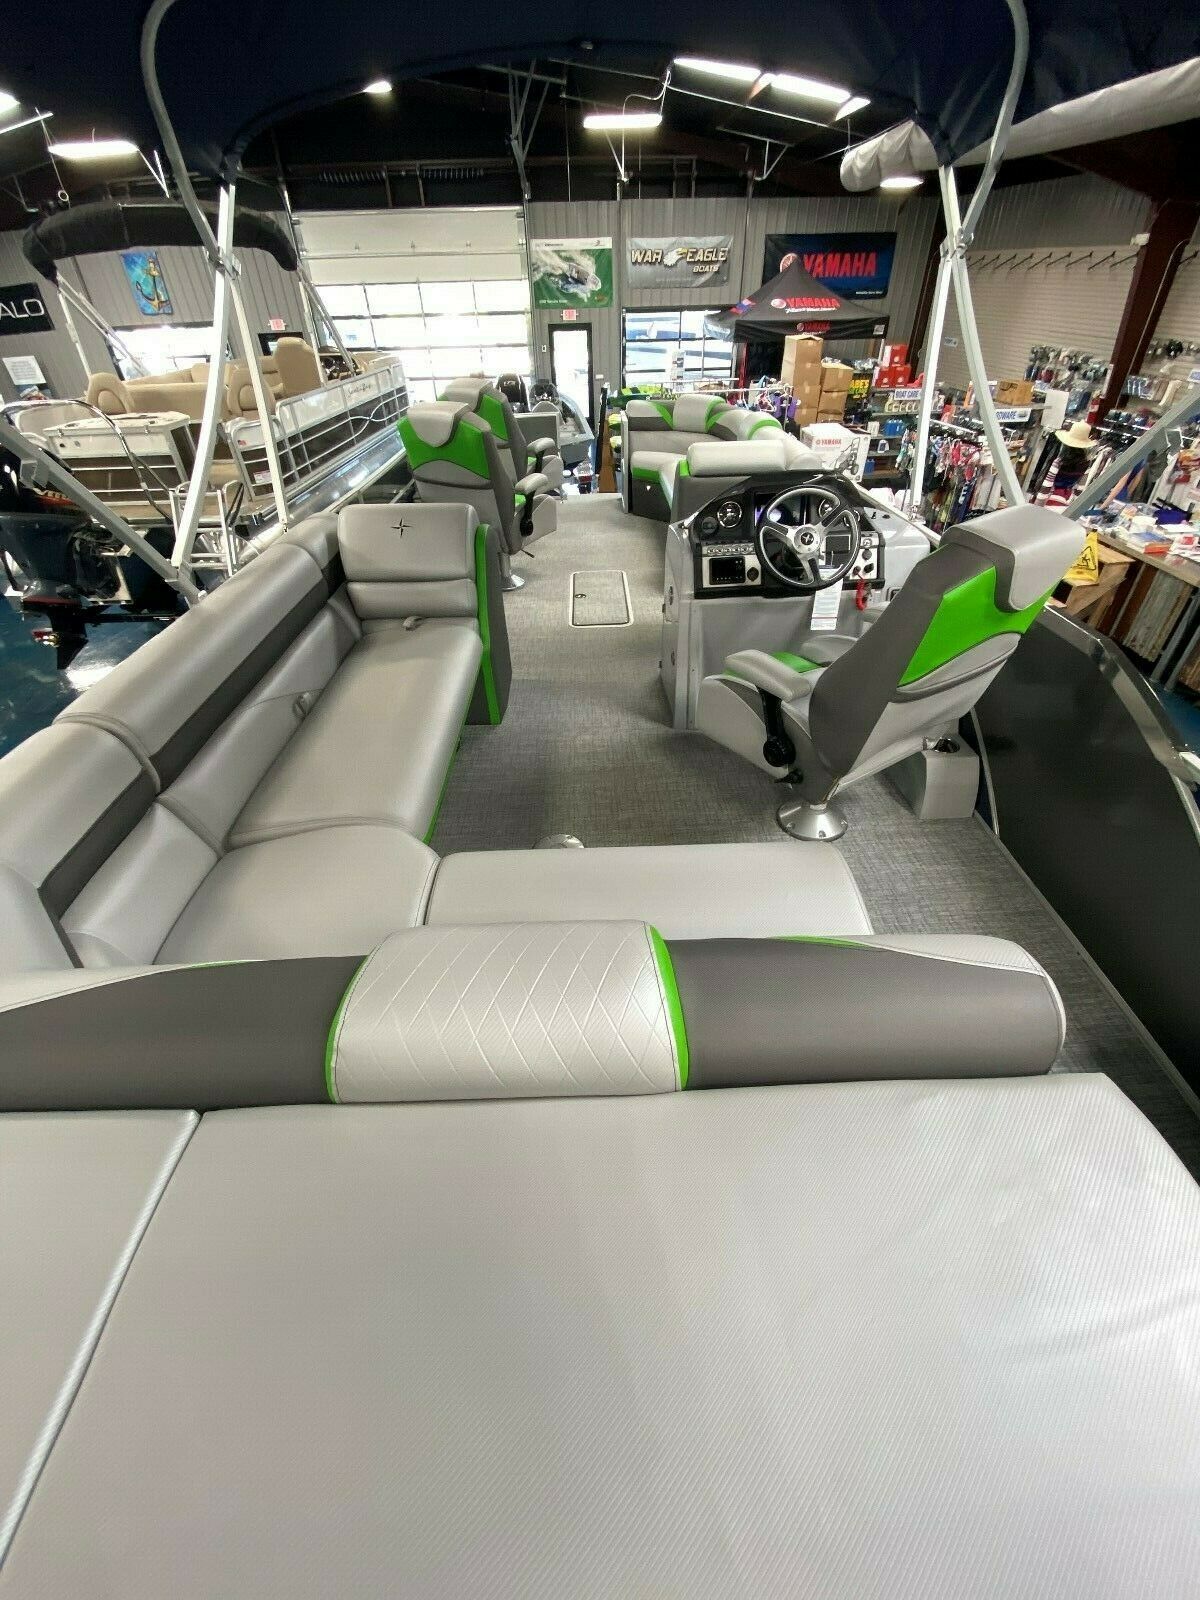 Luxury 25 STS 25PT 3.0 2020 for sale for $63,500 - Boats-from-USA.com